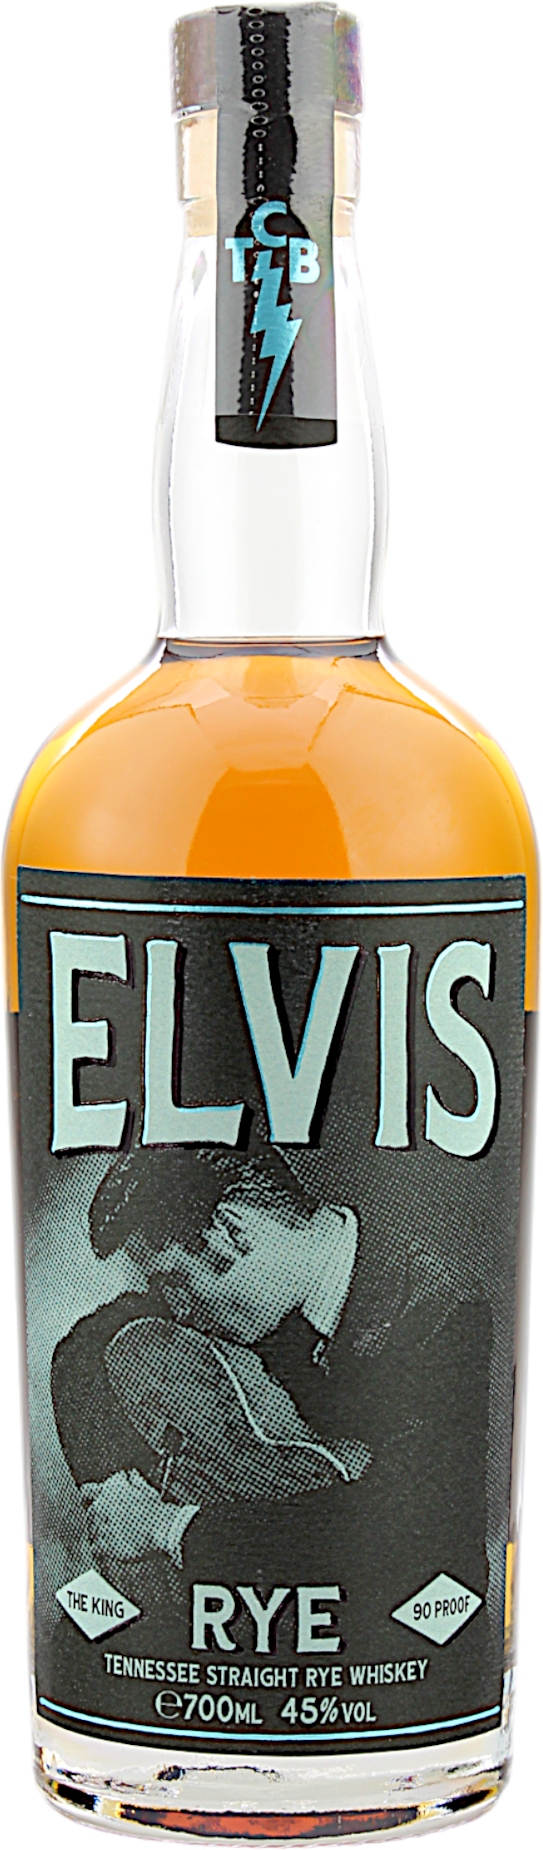 Elvis The King Tennessee Straight Rye Whiskey 45.0% 0,7l